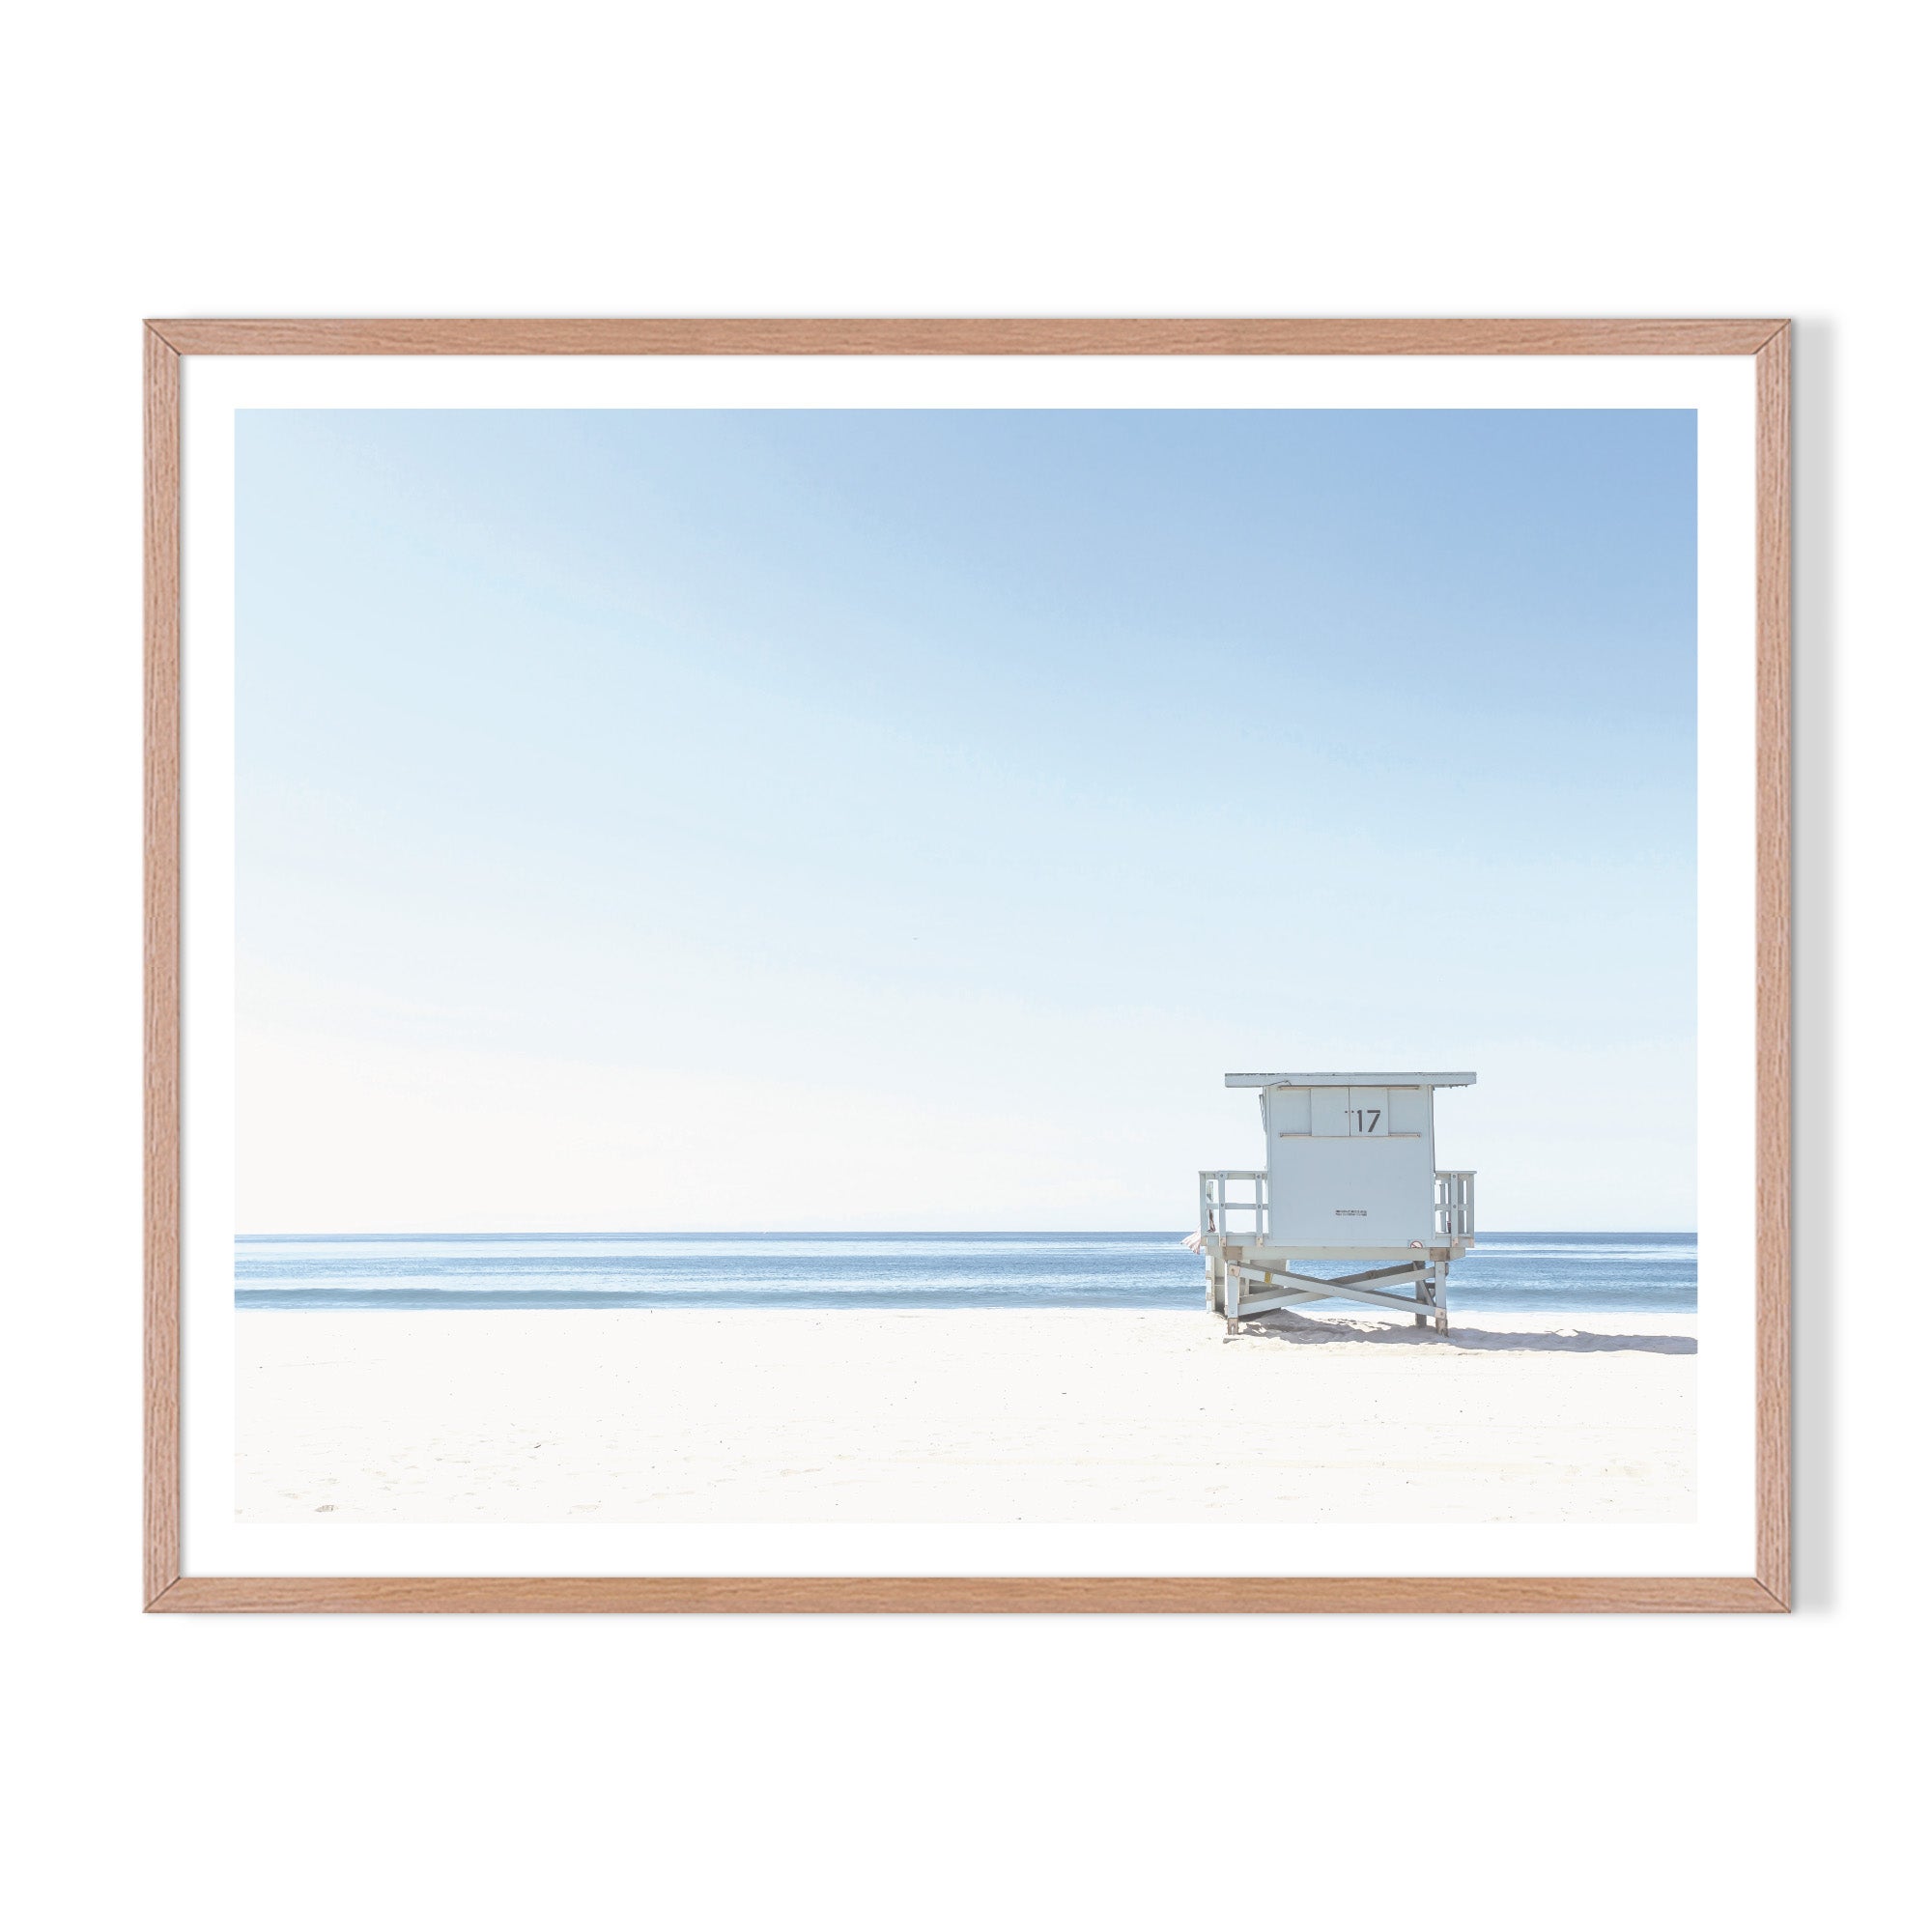 Station 17 Framed Printed Wall Art - Timber